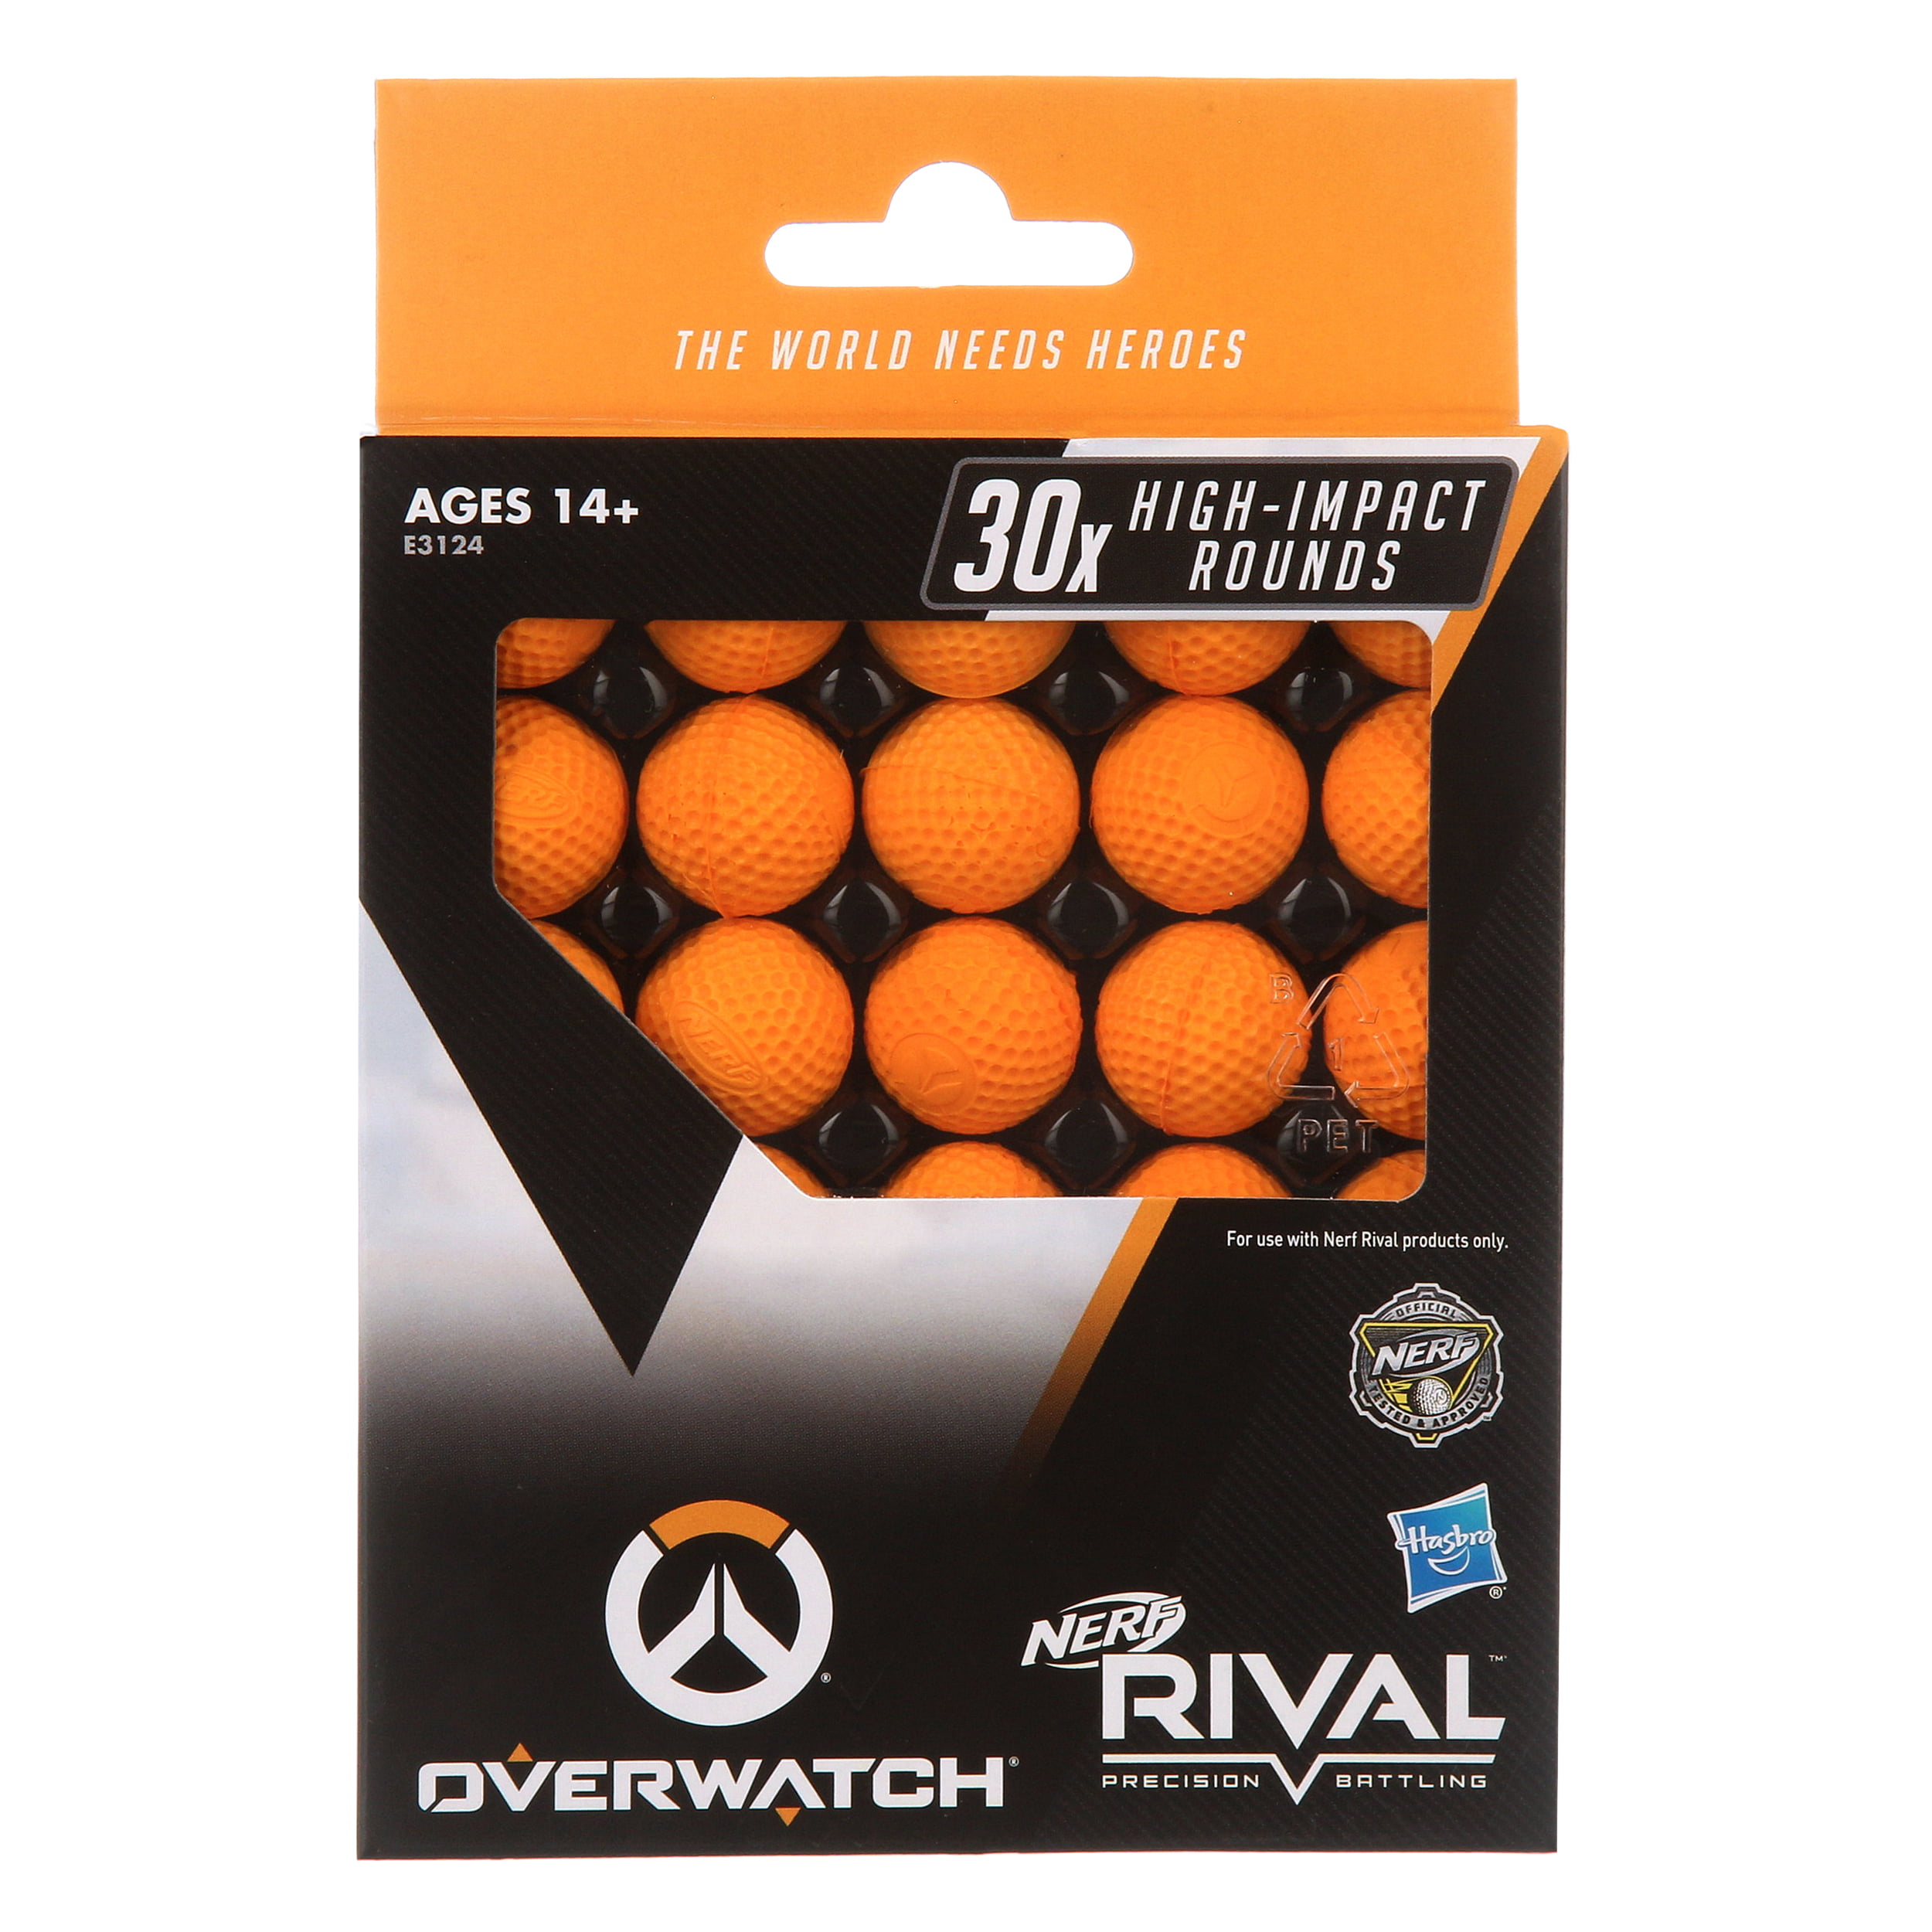 Lot of 3 NERF Rival Overwatch Balls 30x High Impact Rounds Hasbro blizzard 